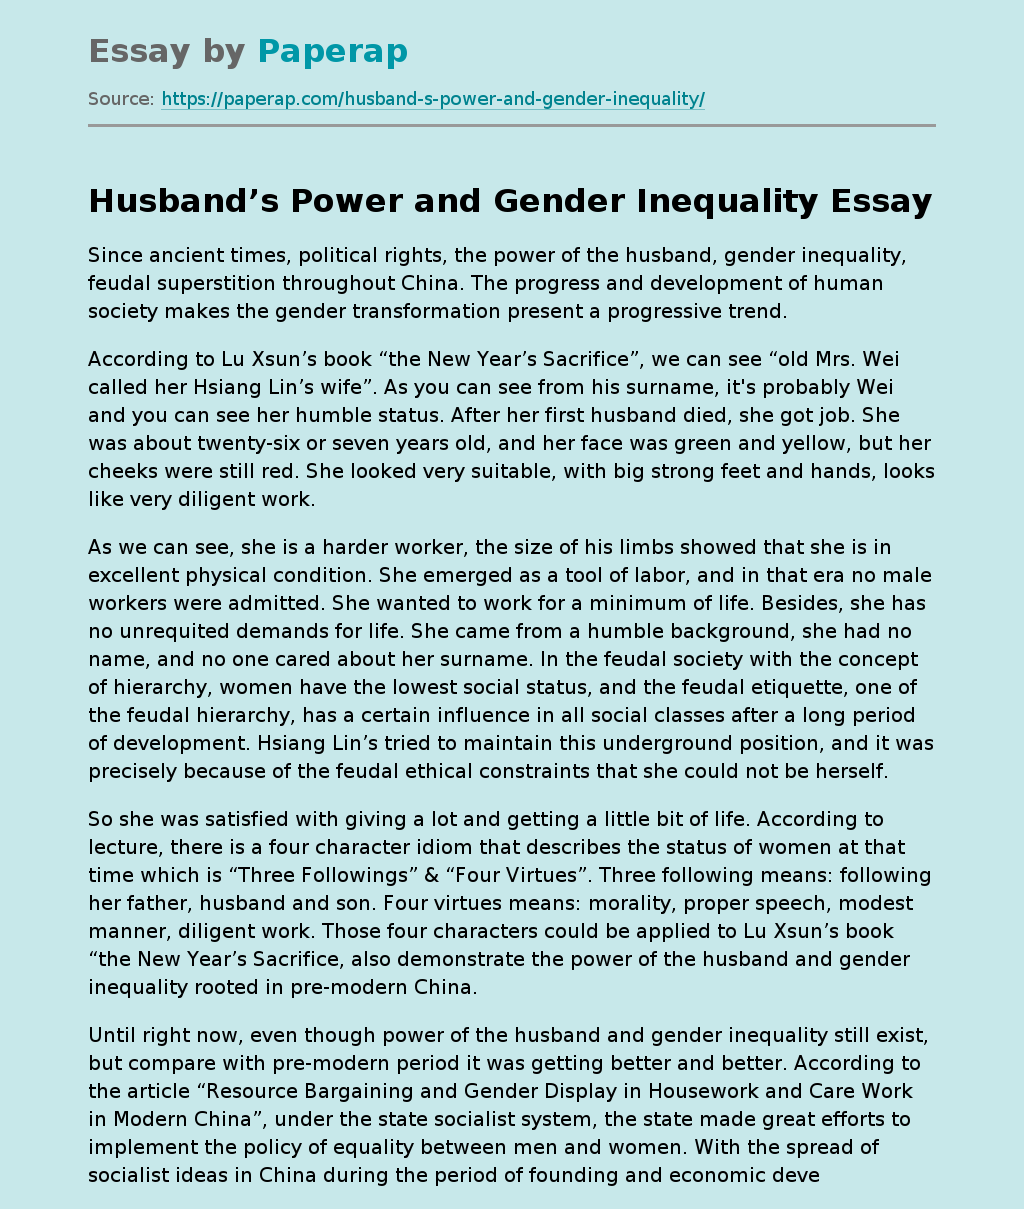 Husband’s Power and Gender Inequality